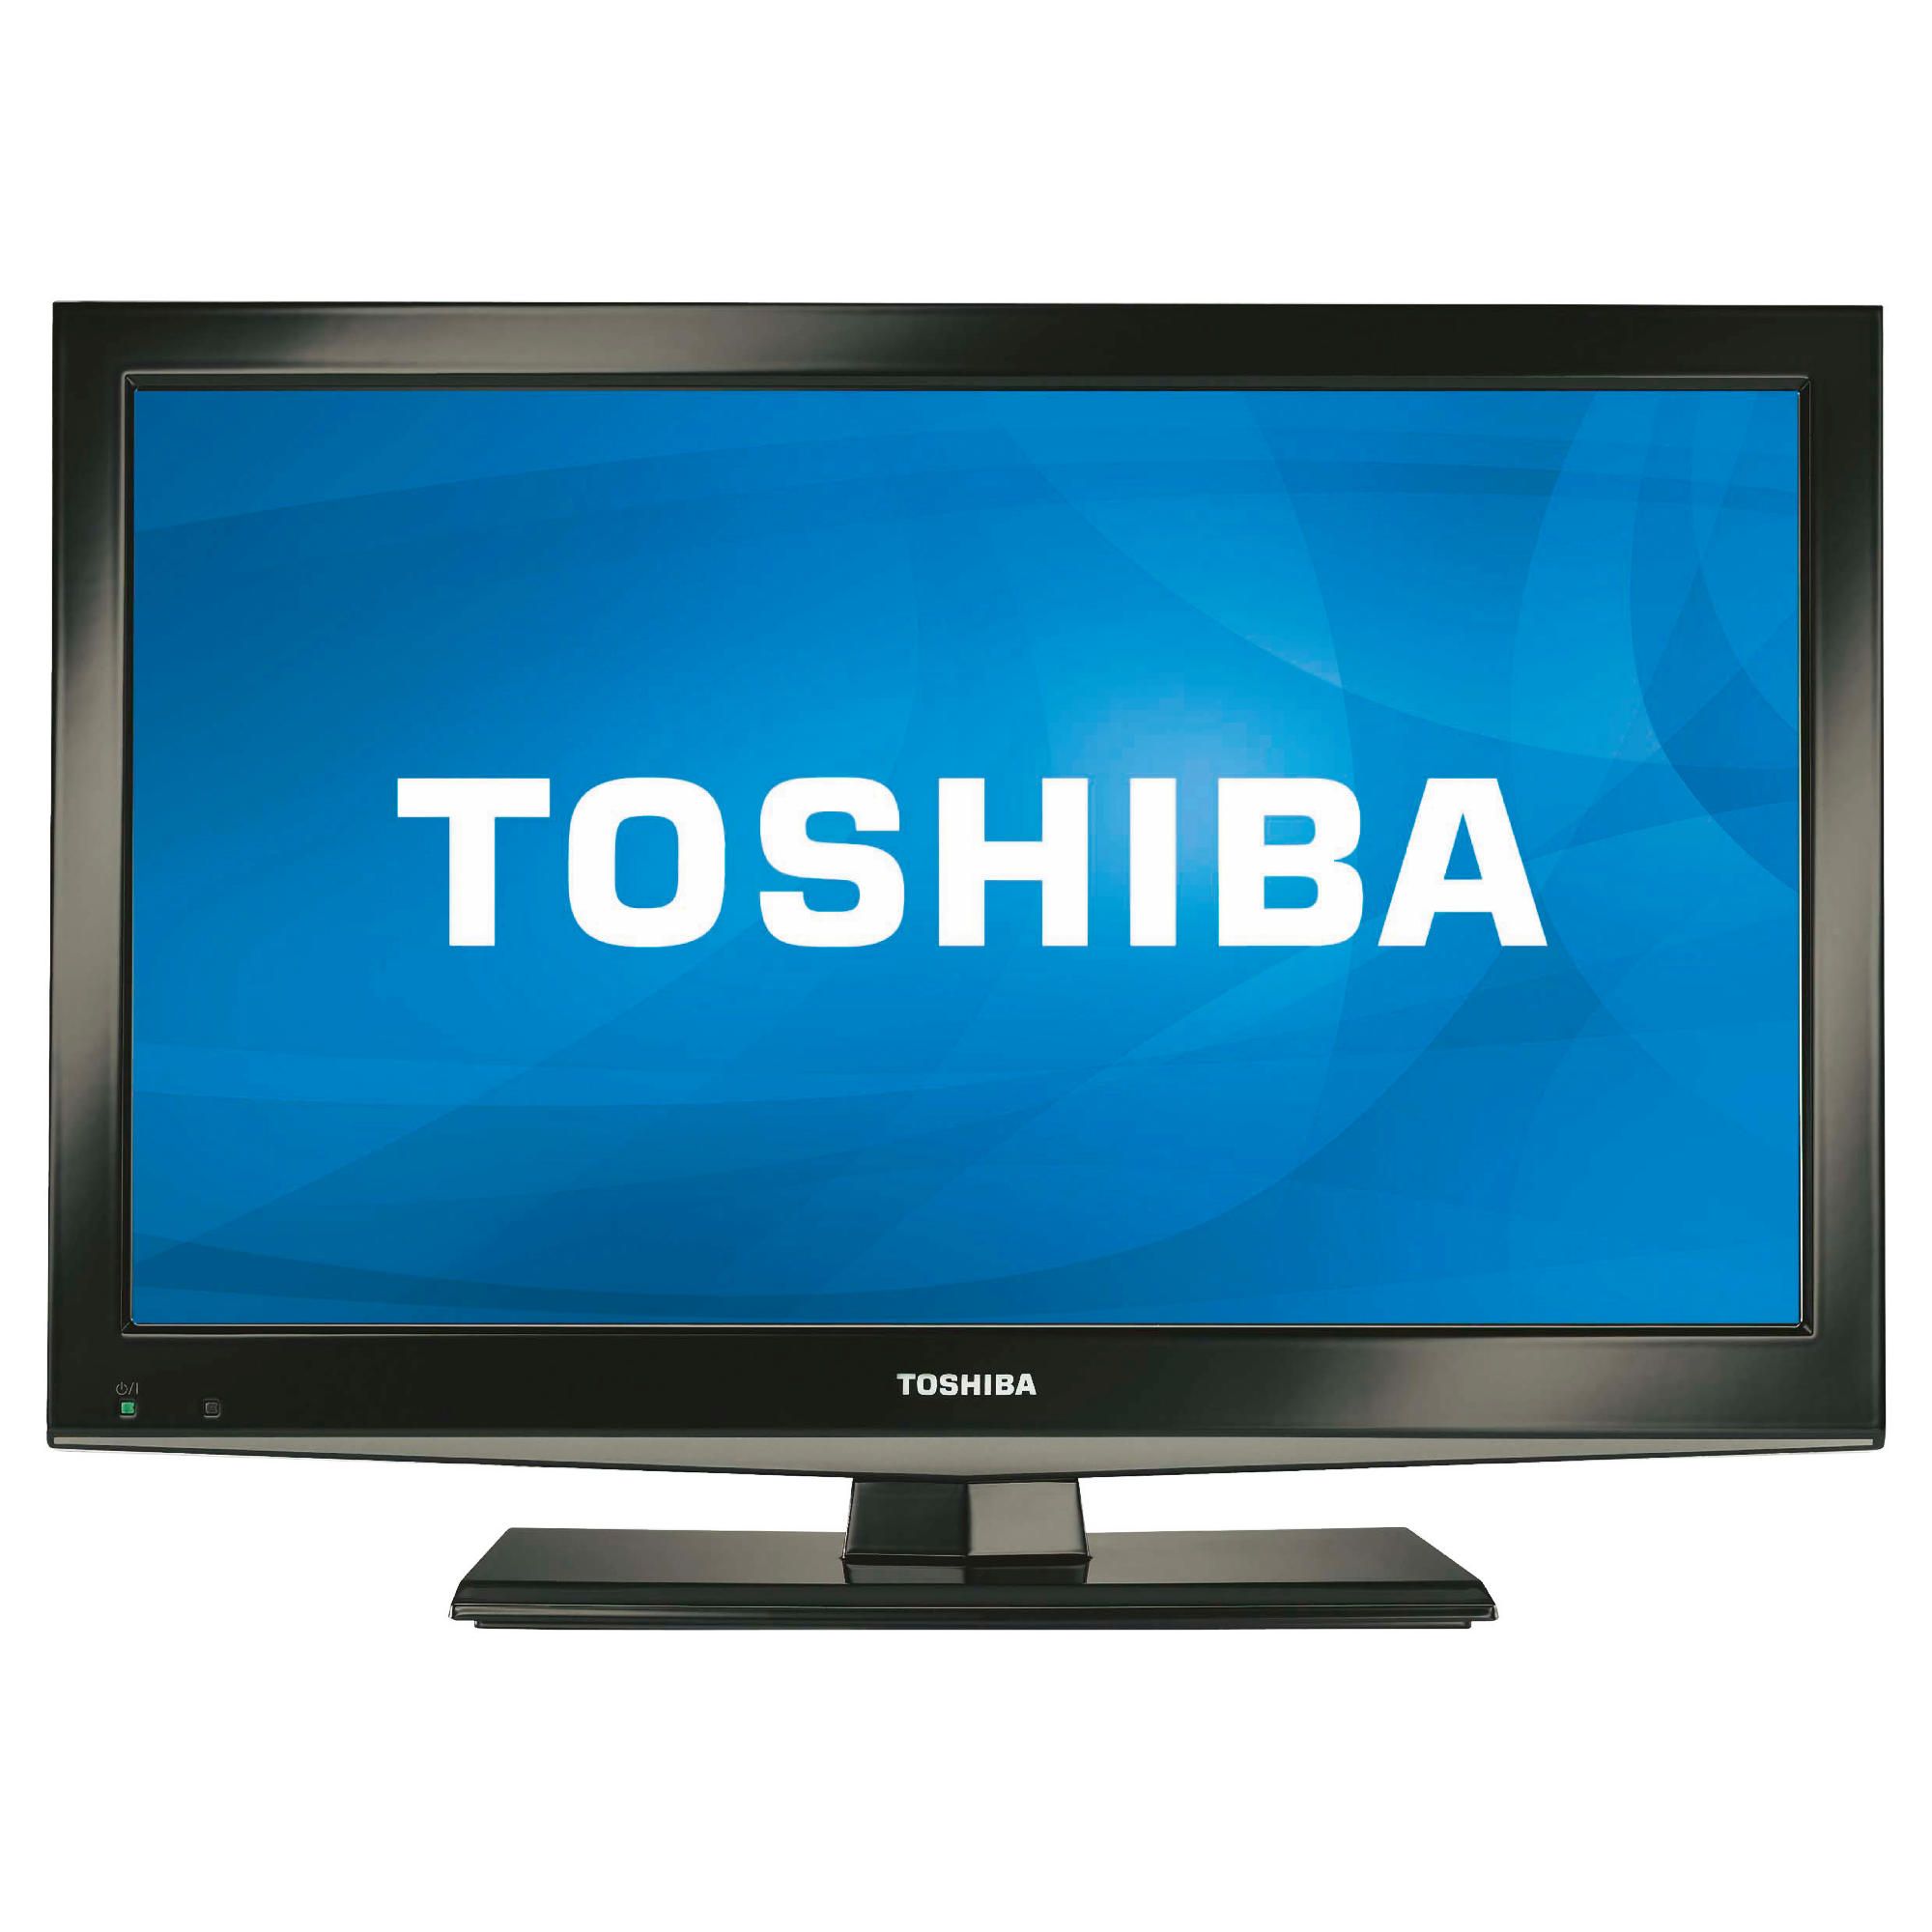 Toshiba 19BL502B2 19 Inch 720P HD Ready LED TV With Freeview